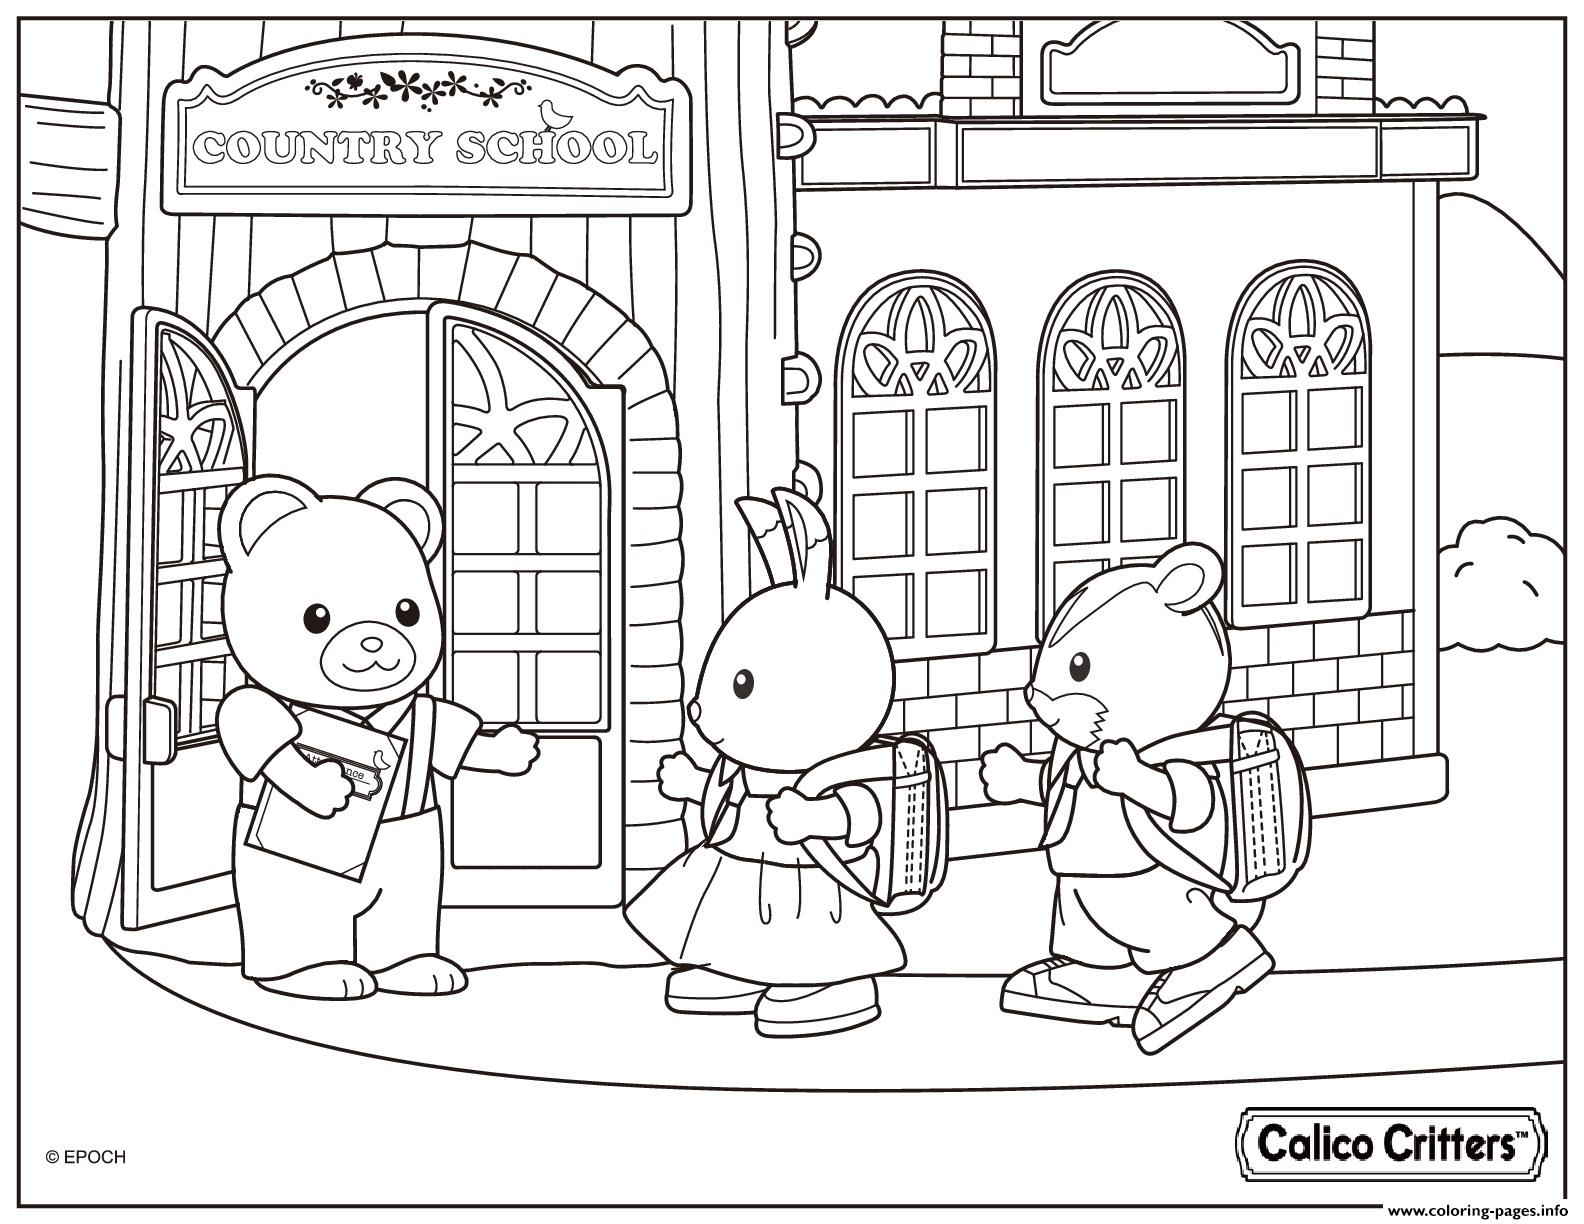 calico-critters-country-school-coloring-pages-printable